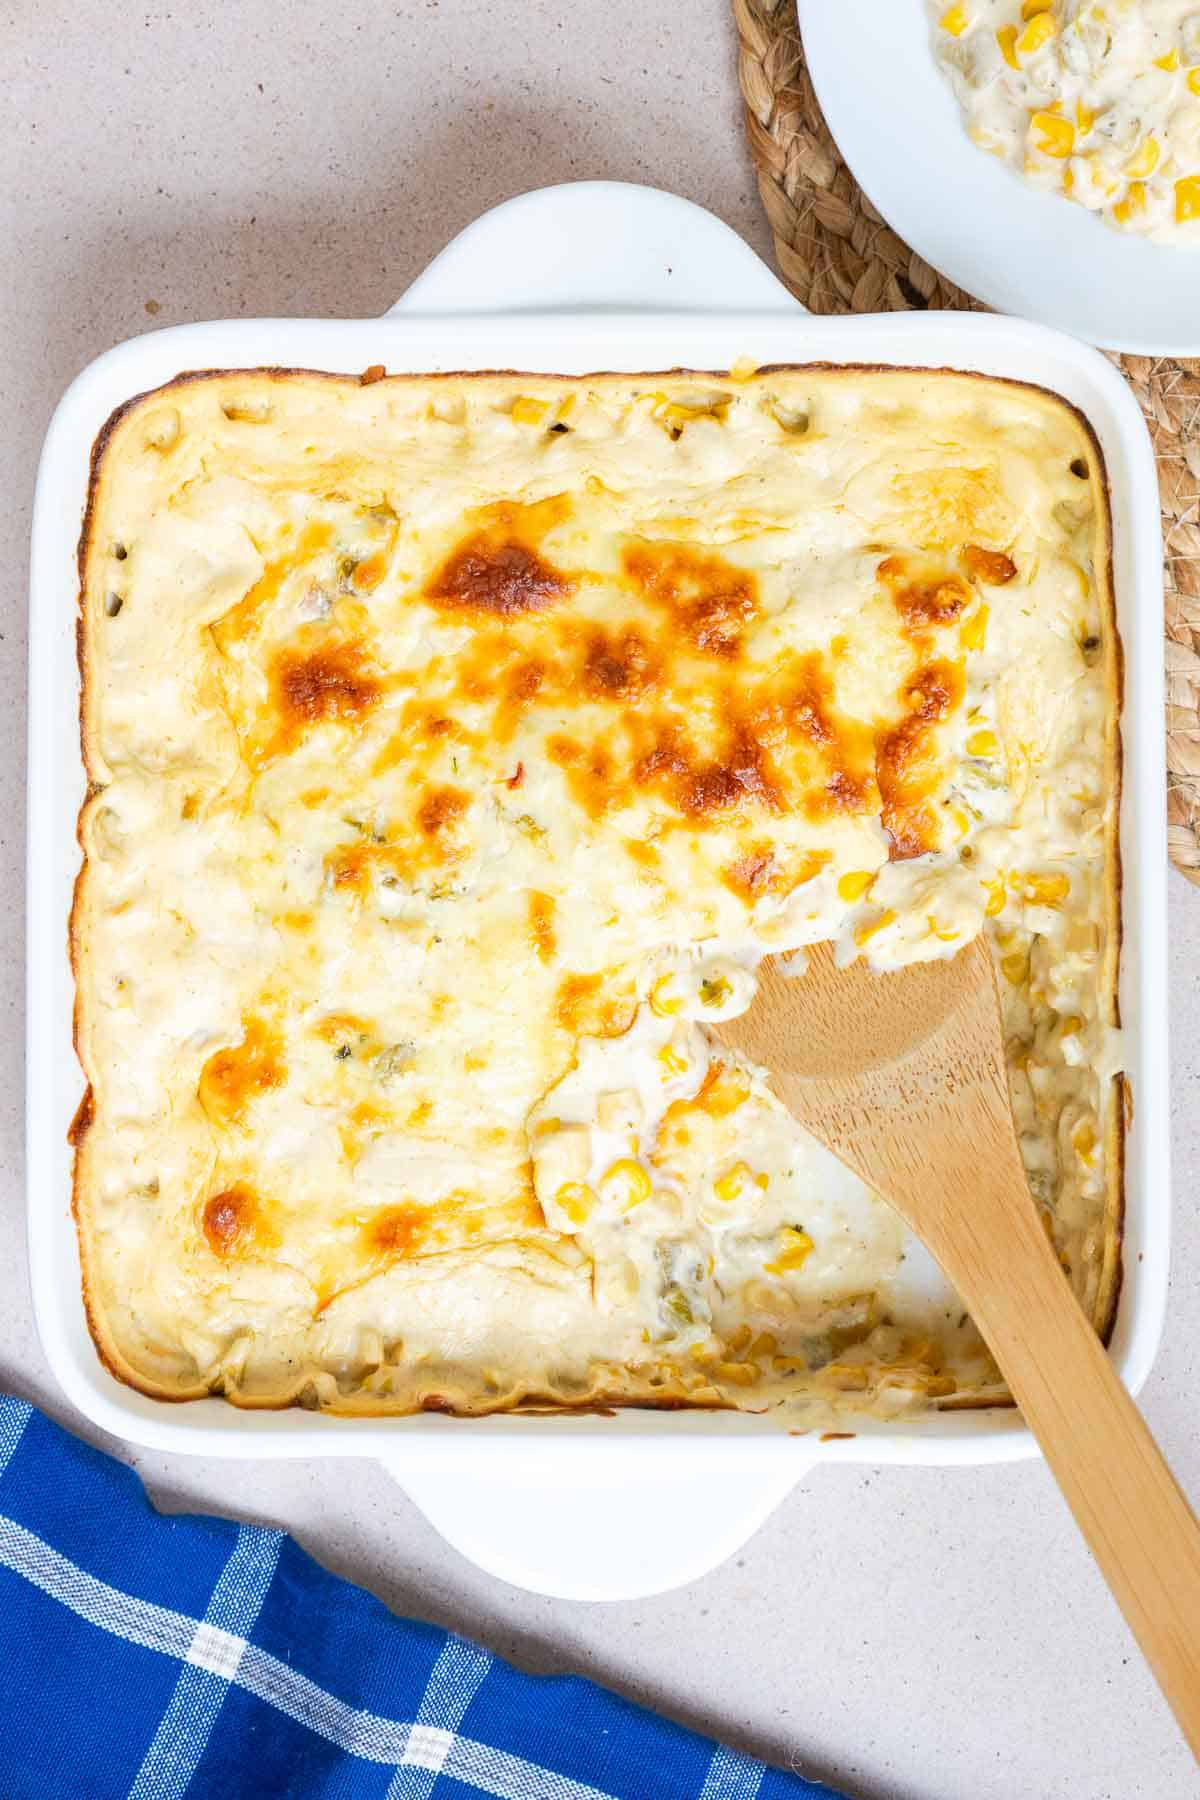 A serving of Green Chile Corn Casserole is scooped out of the baking dish to show the creamy consistency.